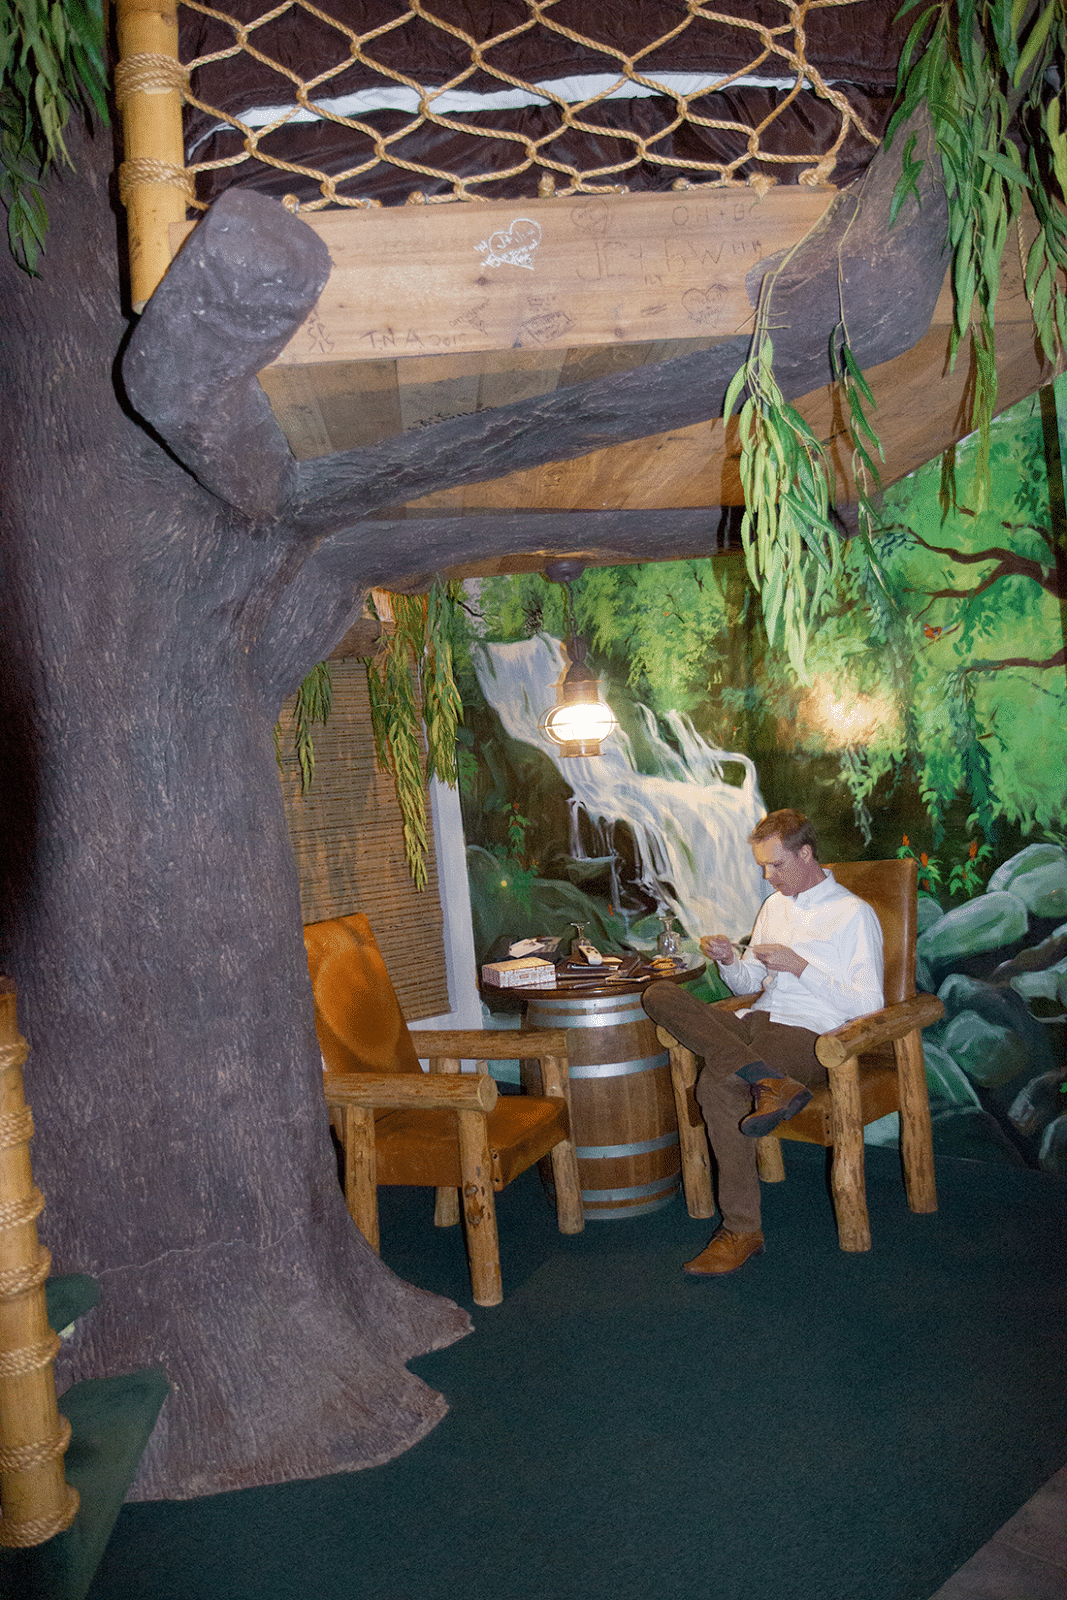 Man enjoying breakfast at Waterfall jetted tub at the Swiss Family Robinson Room at the Anniversary Inn. 